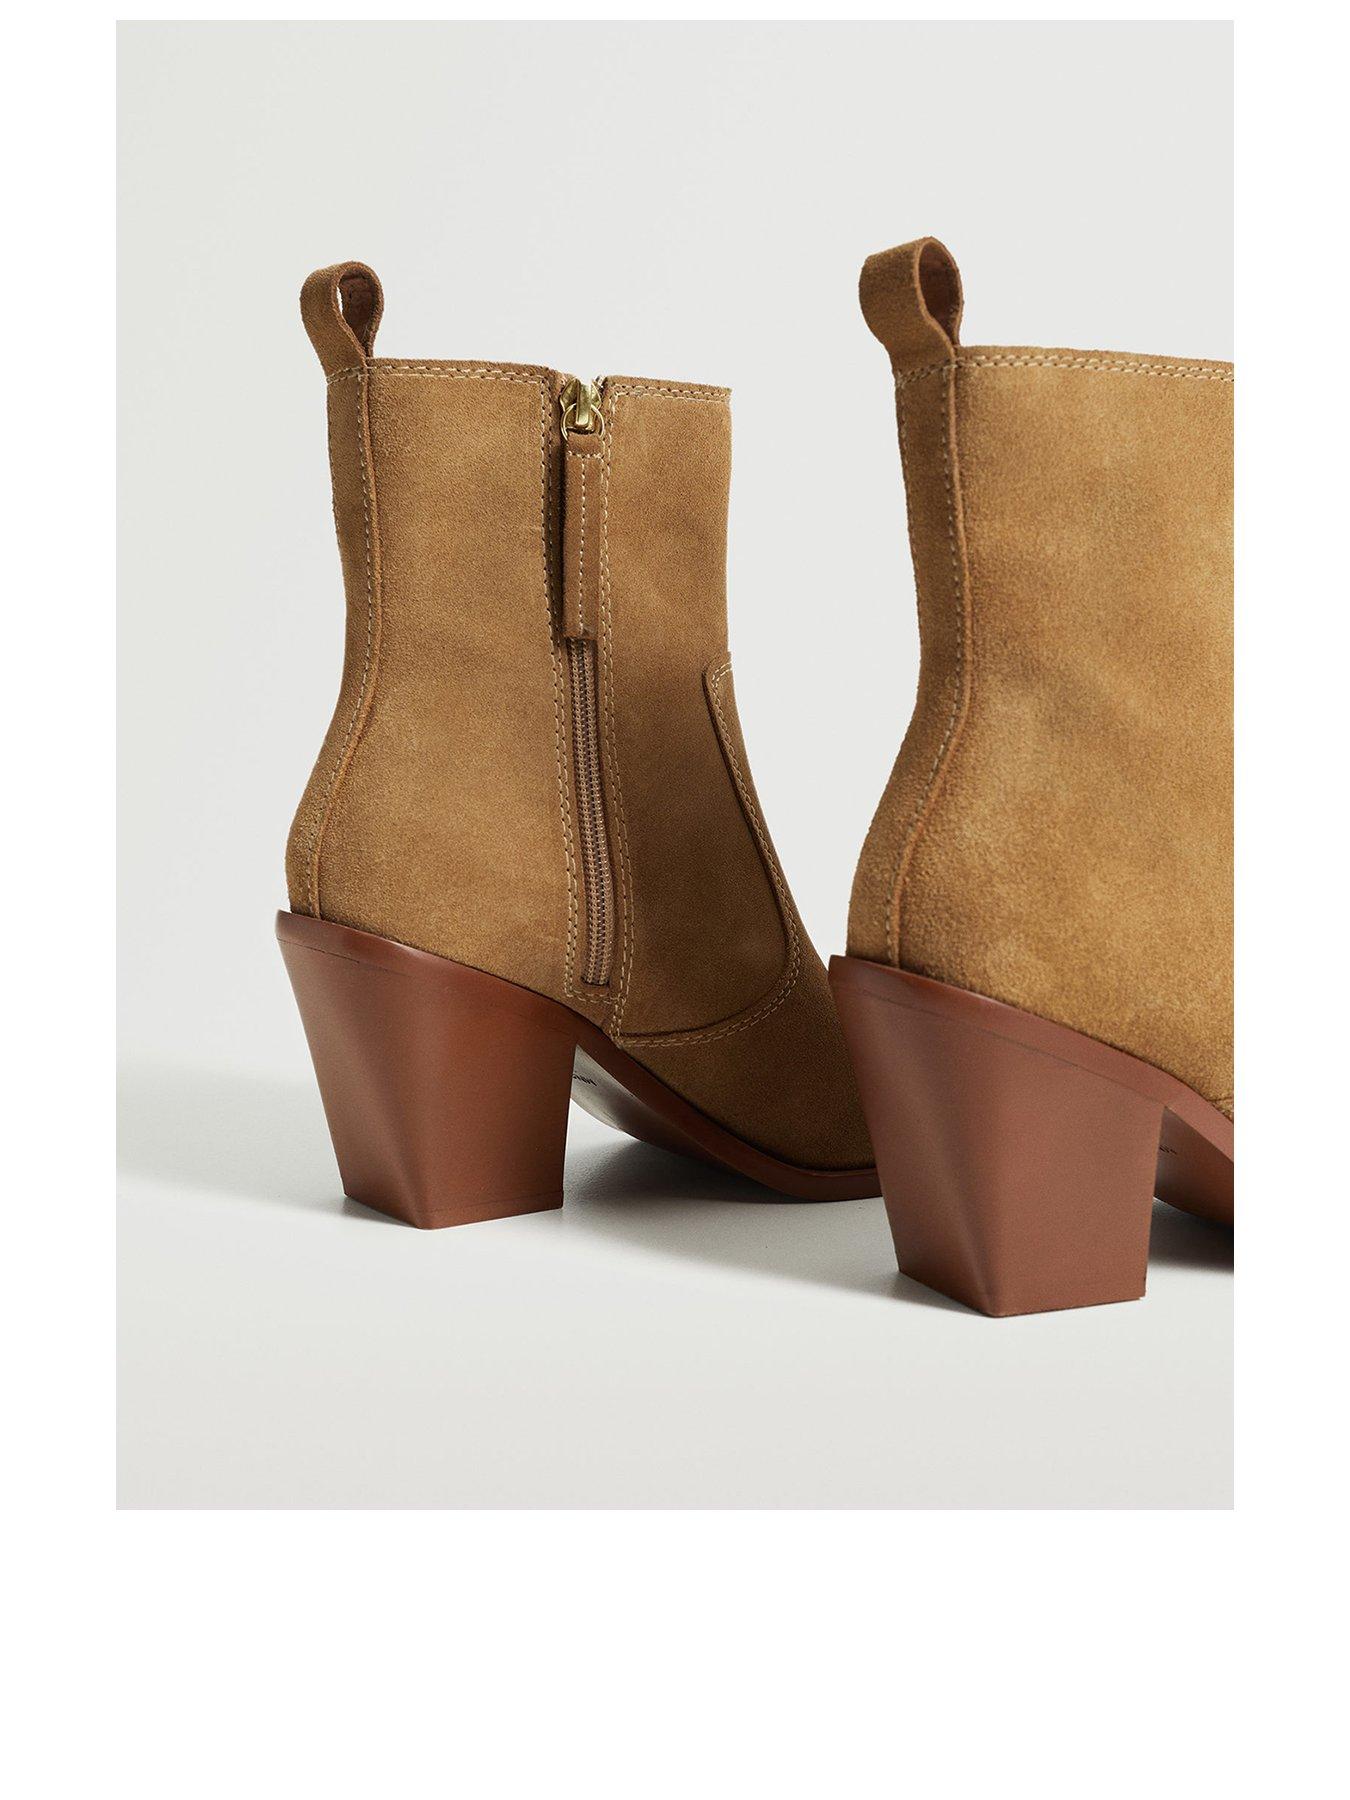  Heeled Ankle Boots - Brown